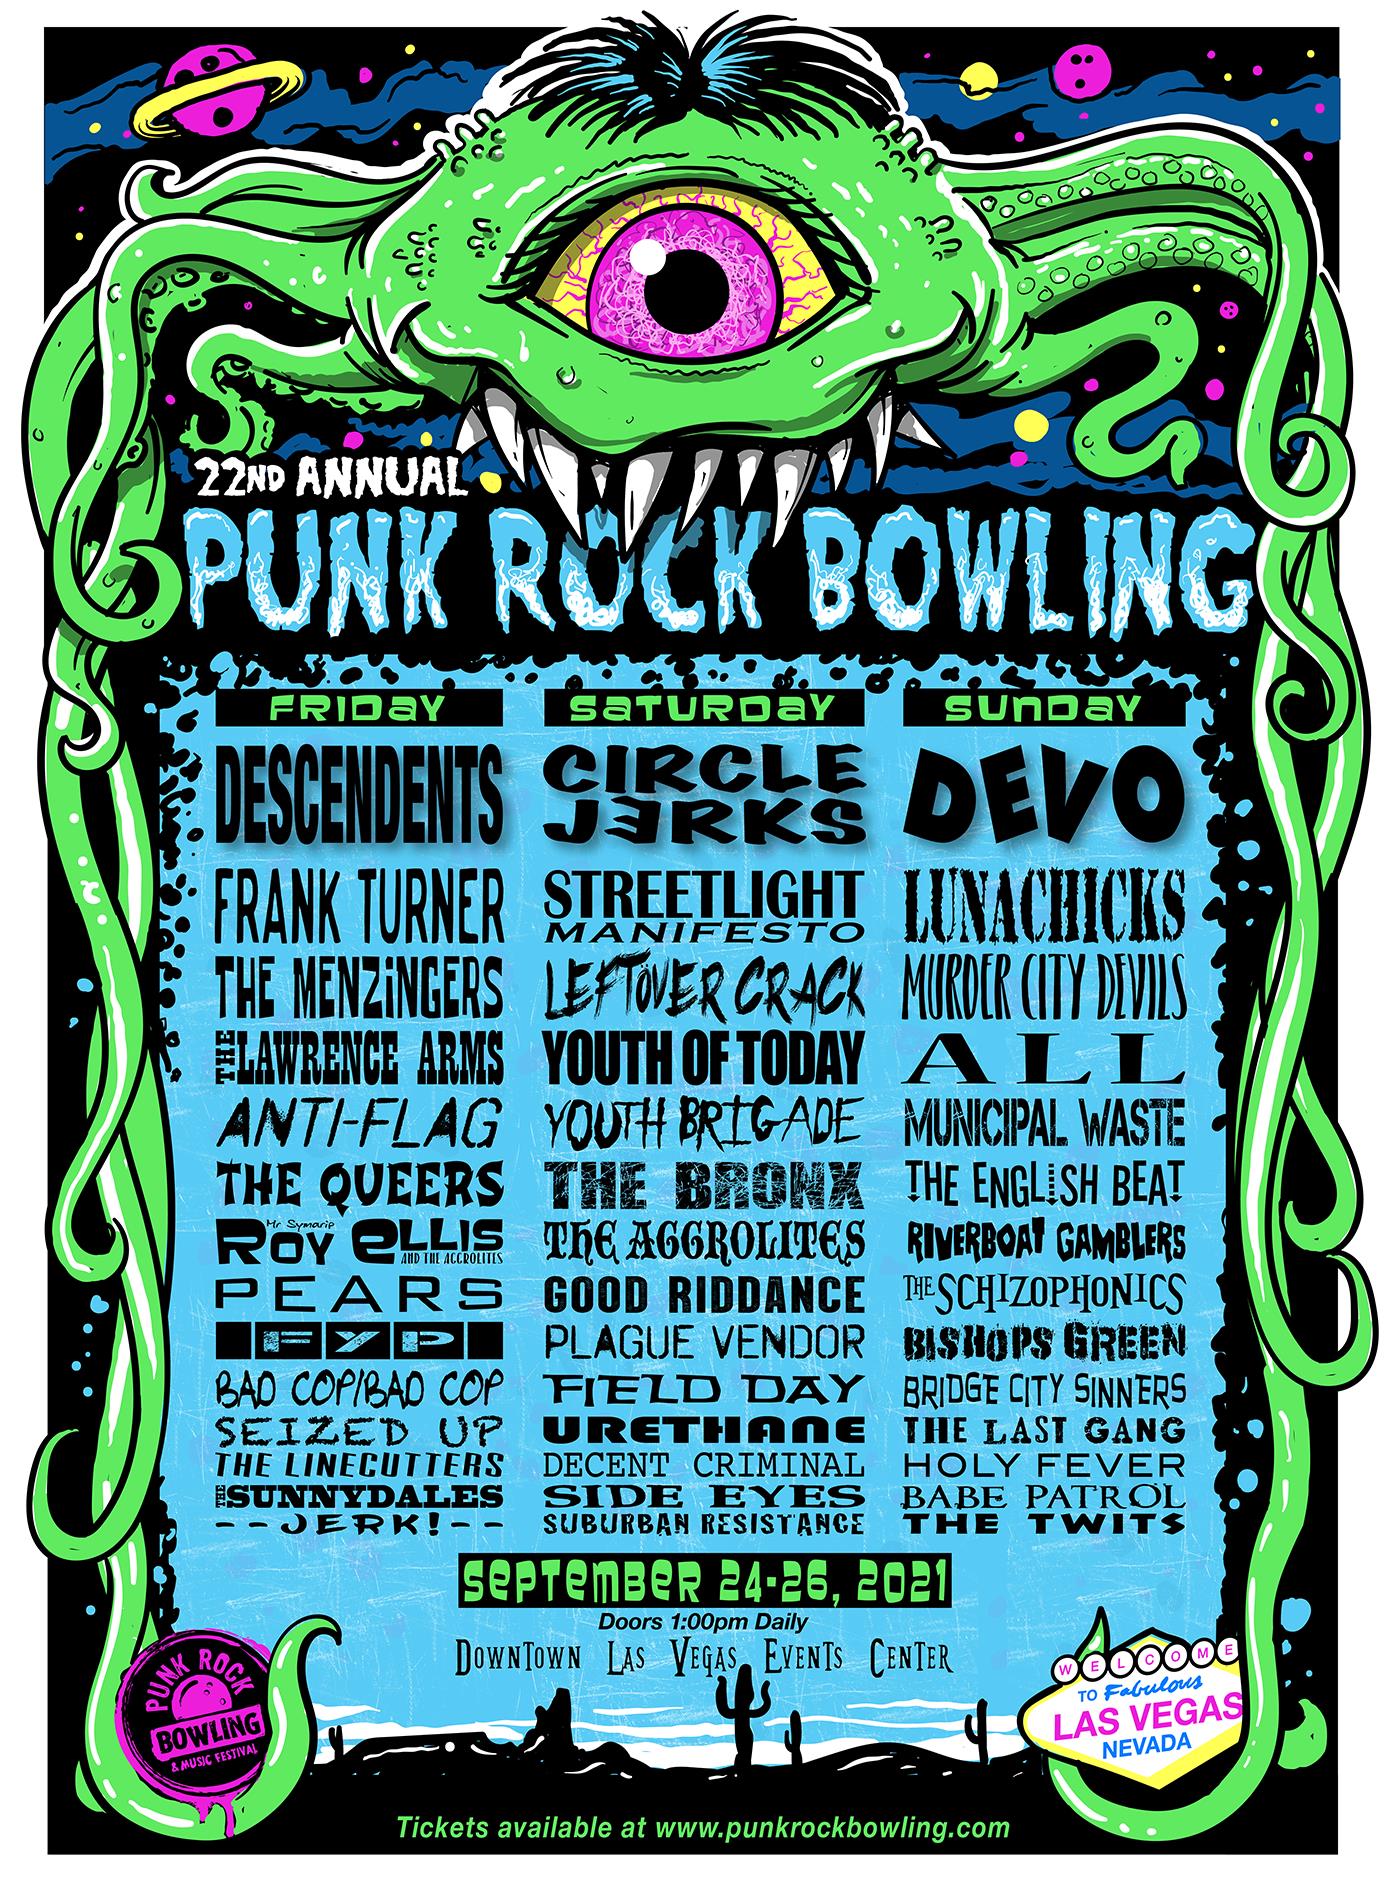 Buy Tickets to Punk Rock Bowling and Music Festival 2021 in Las Vegas